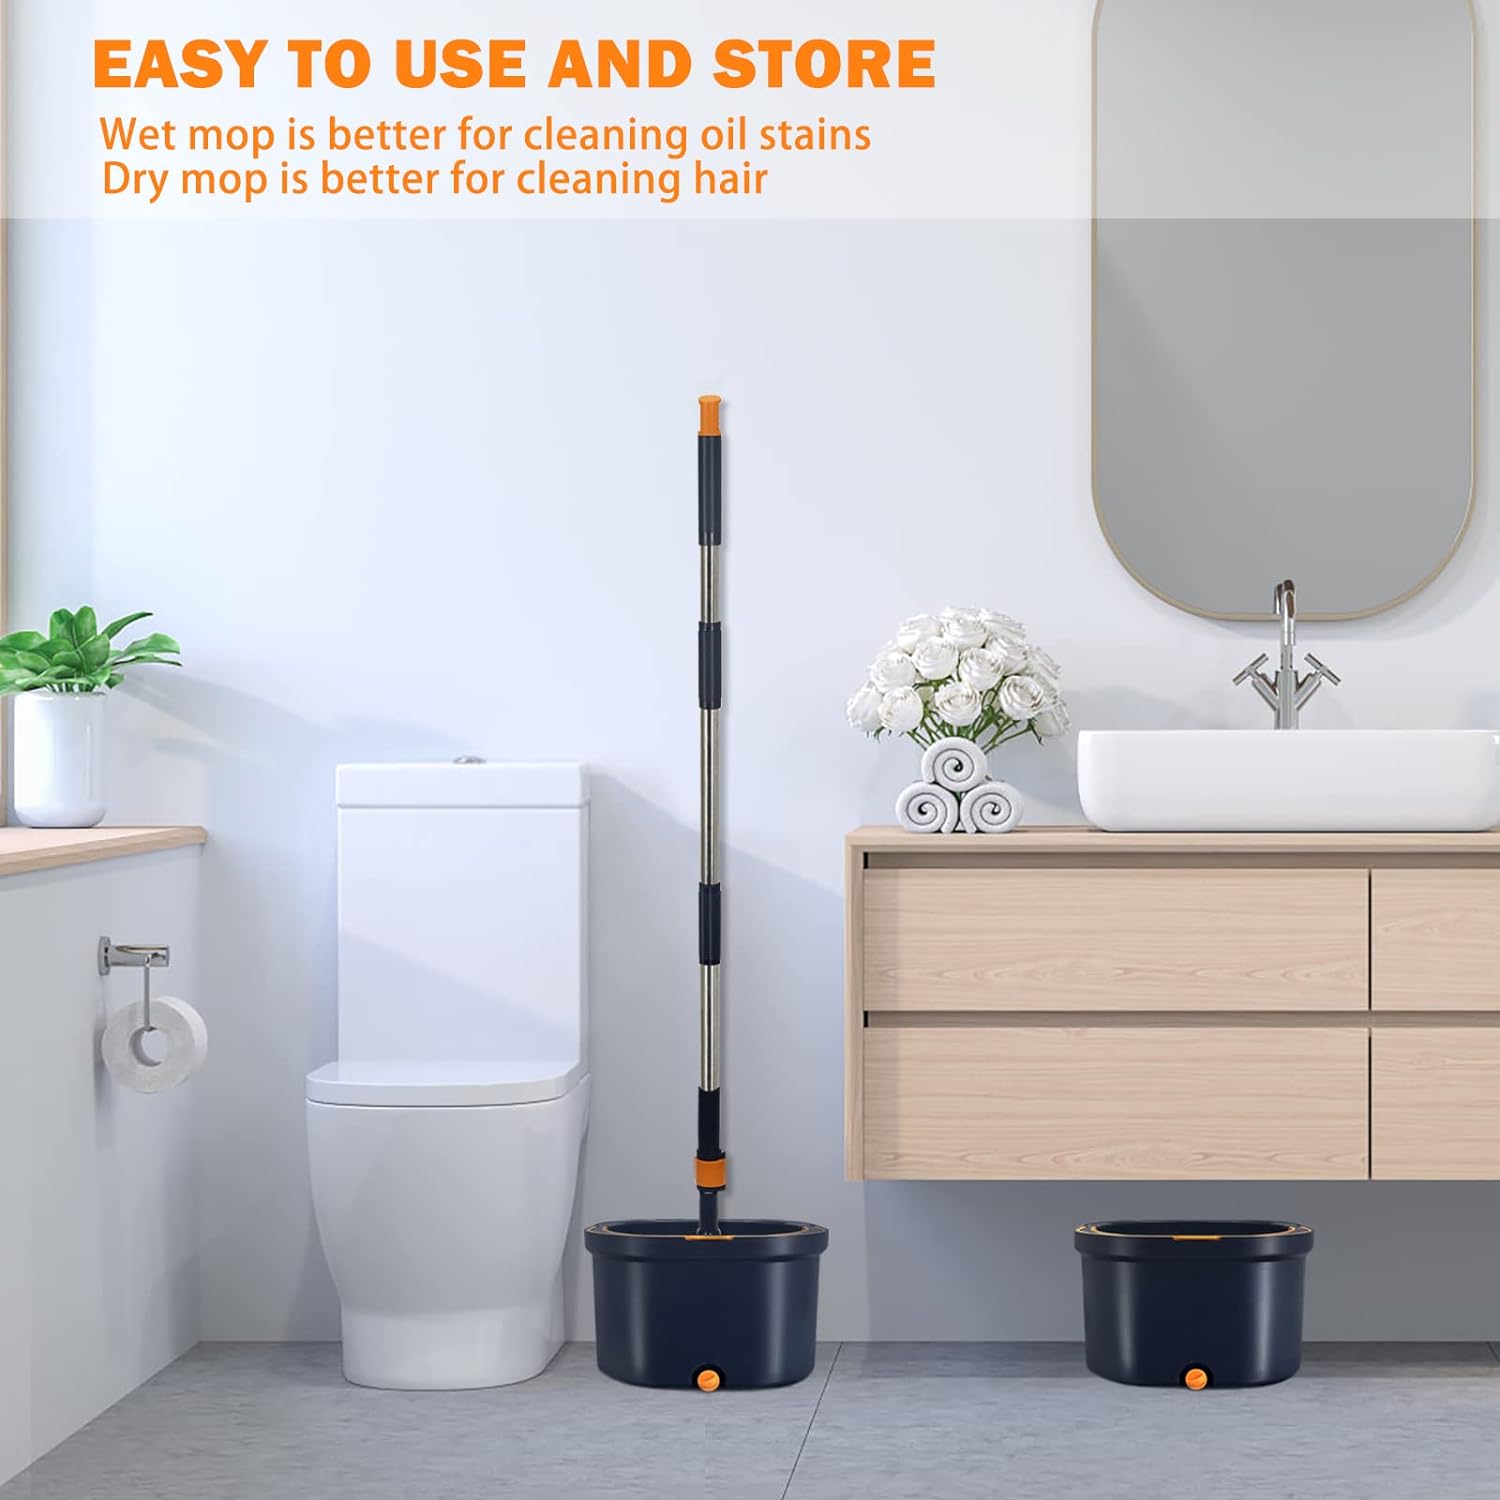 1 set of Spin Mop and Bucket placed next to a toilet closet and 1 Bucket alone placed under wash basin  